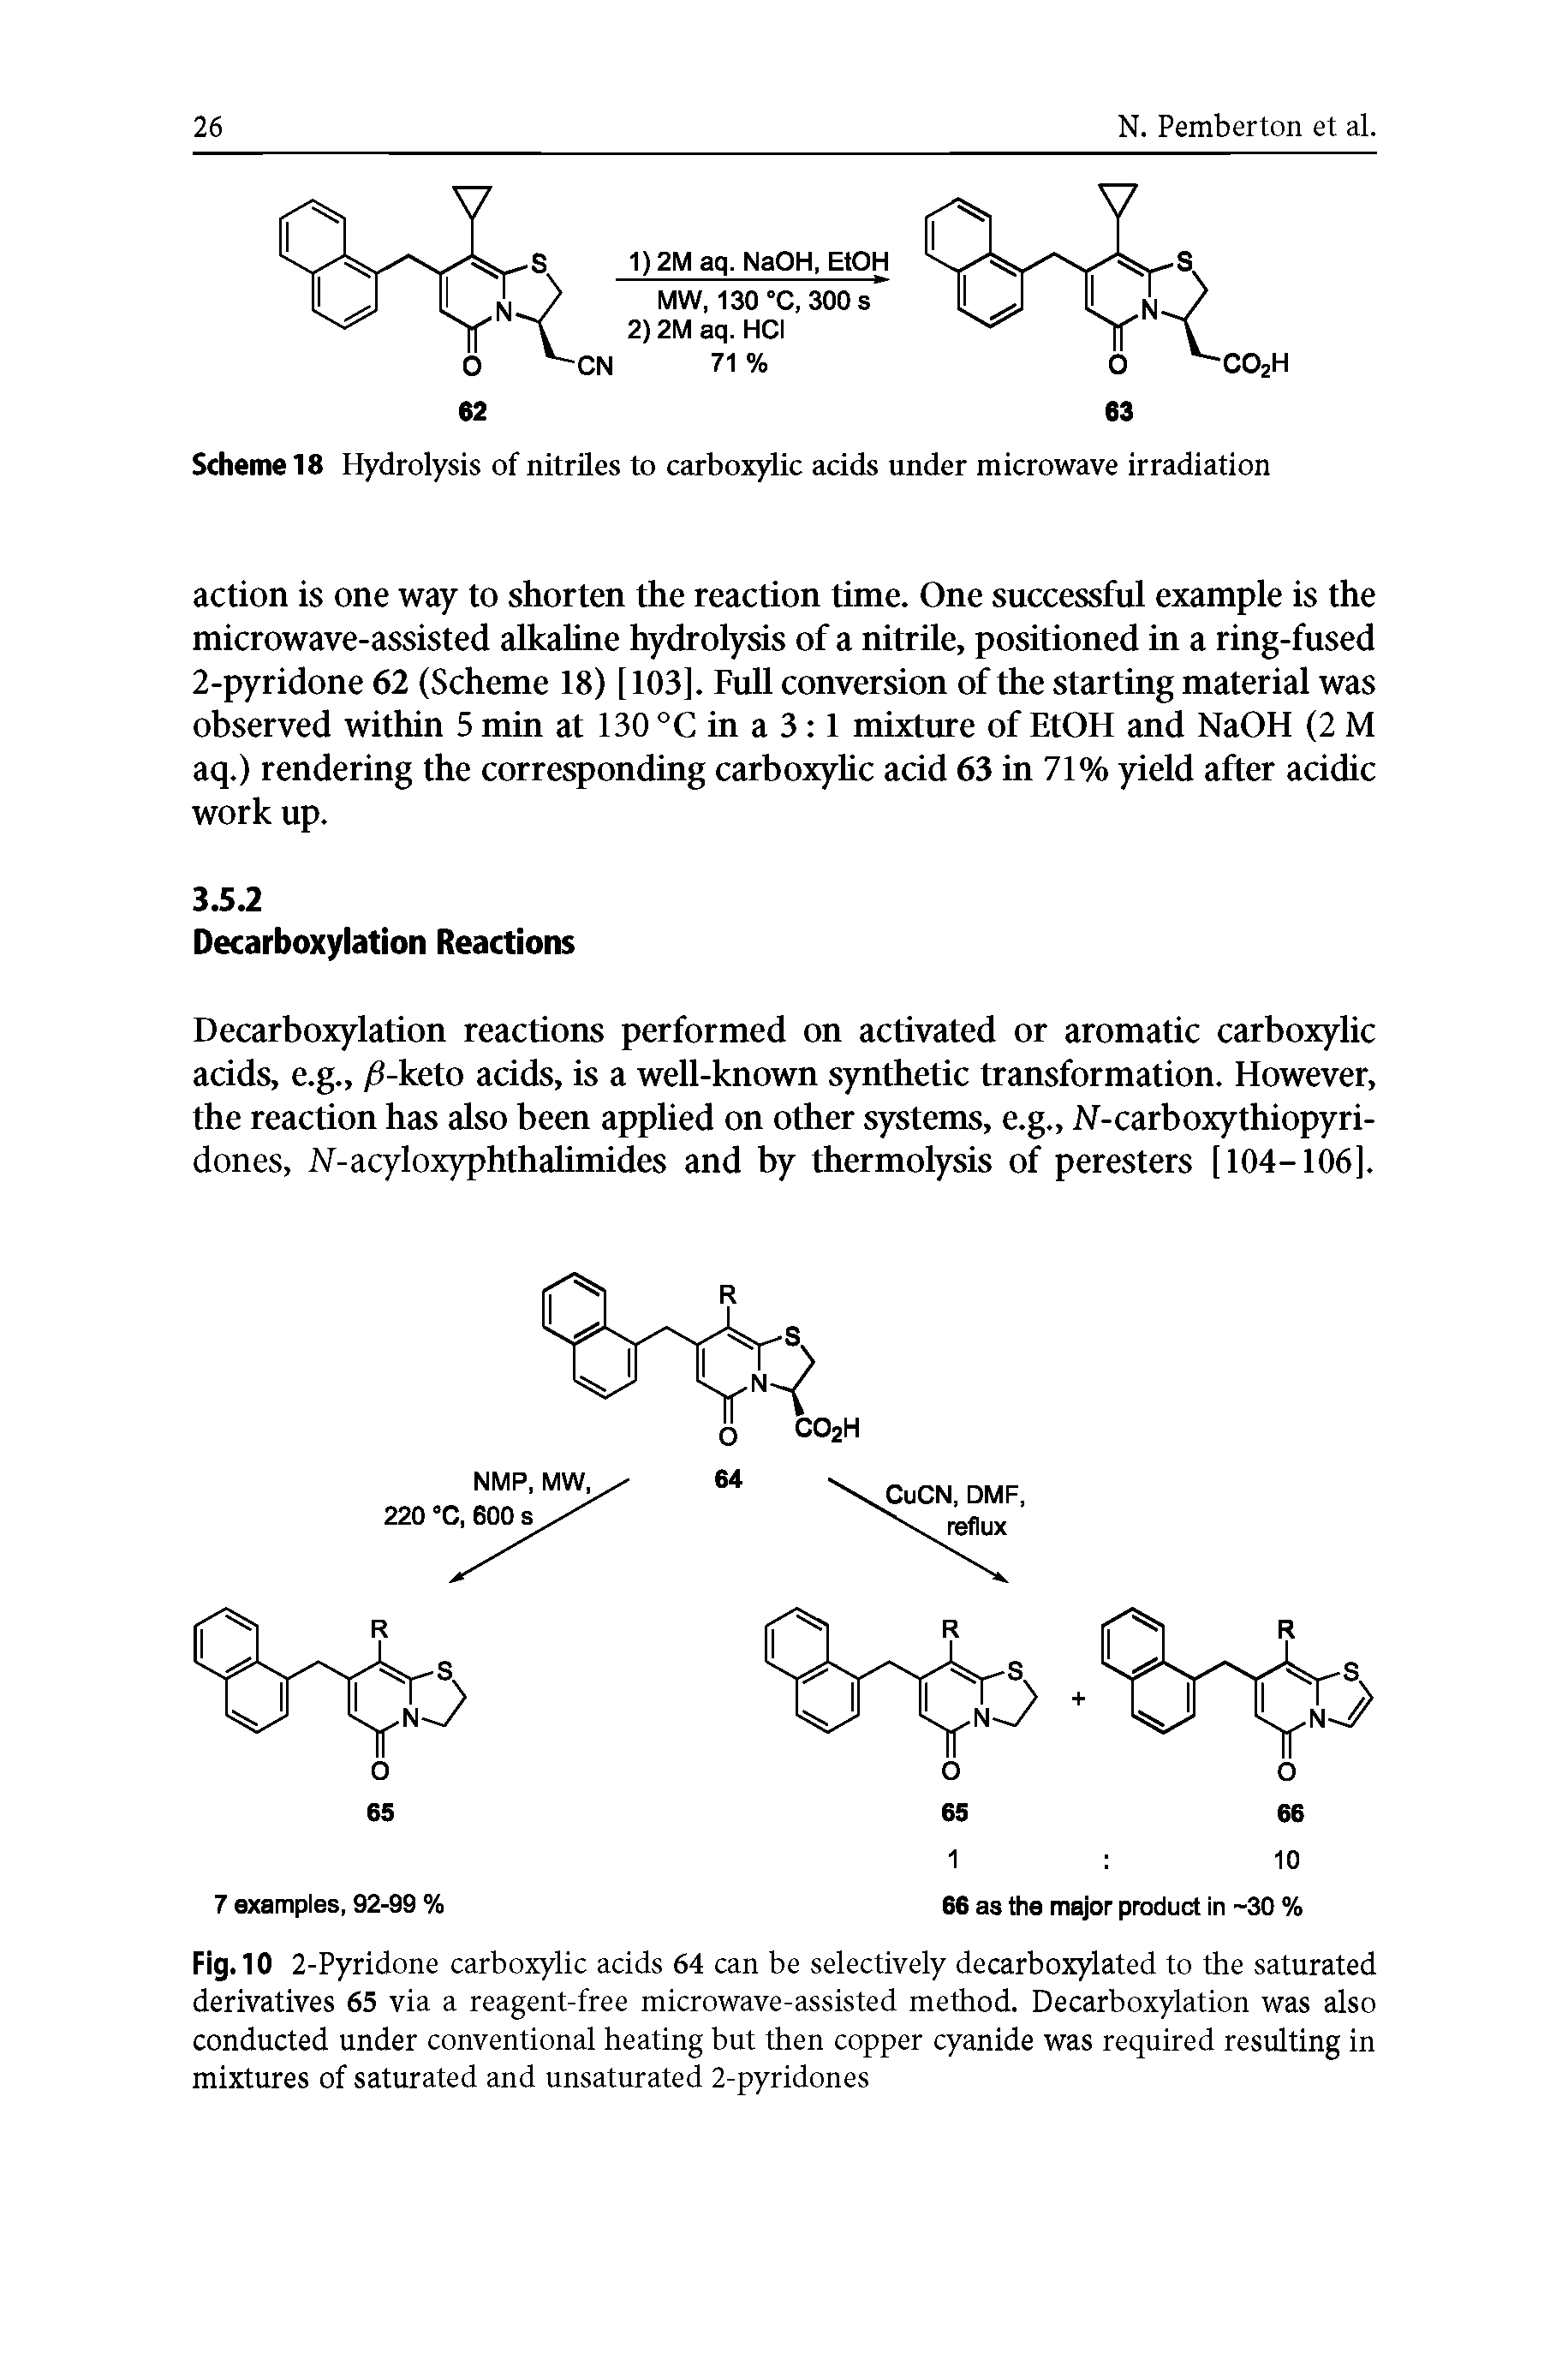 Fig. 10 2-Pyridone carboxylic acids 64 can be selectively decarboxylated to the saturated derivatives 65 via a reagent-free microwave-assisted method. Decarboxylation was also conducted under conventional heating but then copper cyanide was required resulting in mixtures of saturated and unsaturated 2-pyridones...